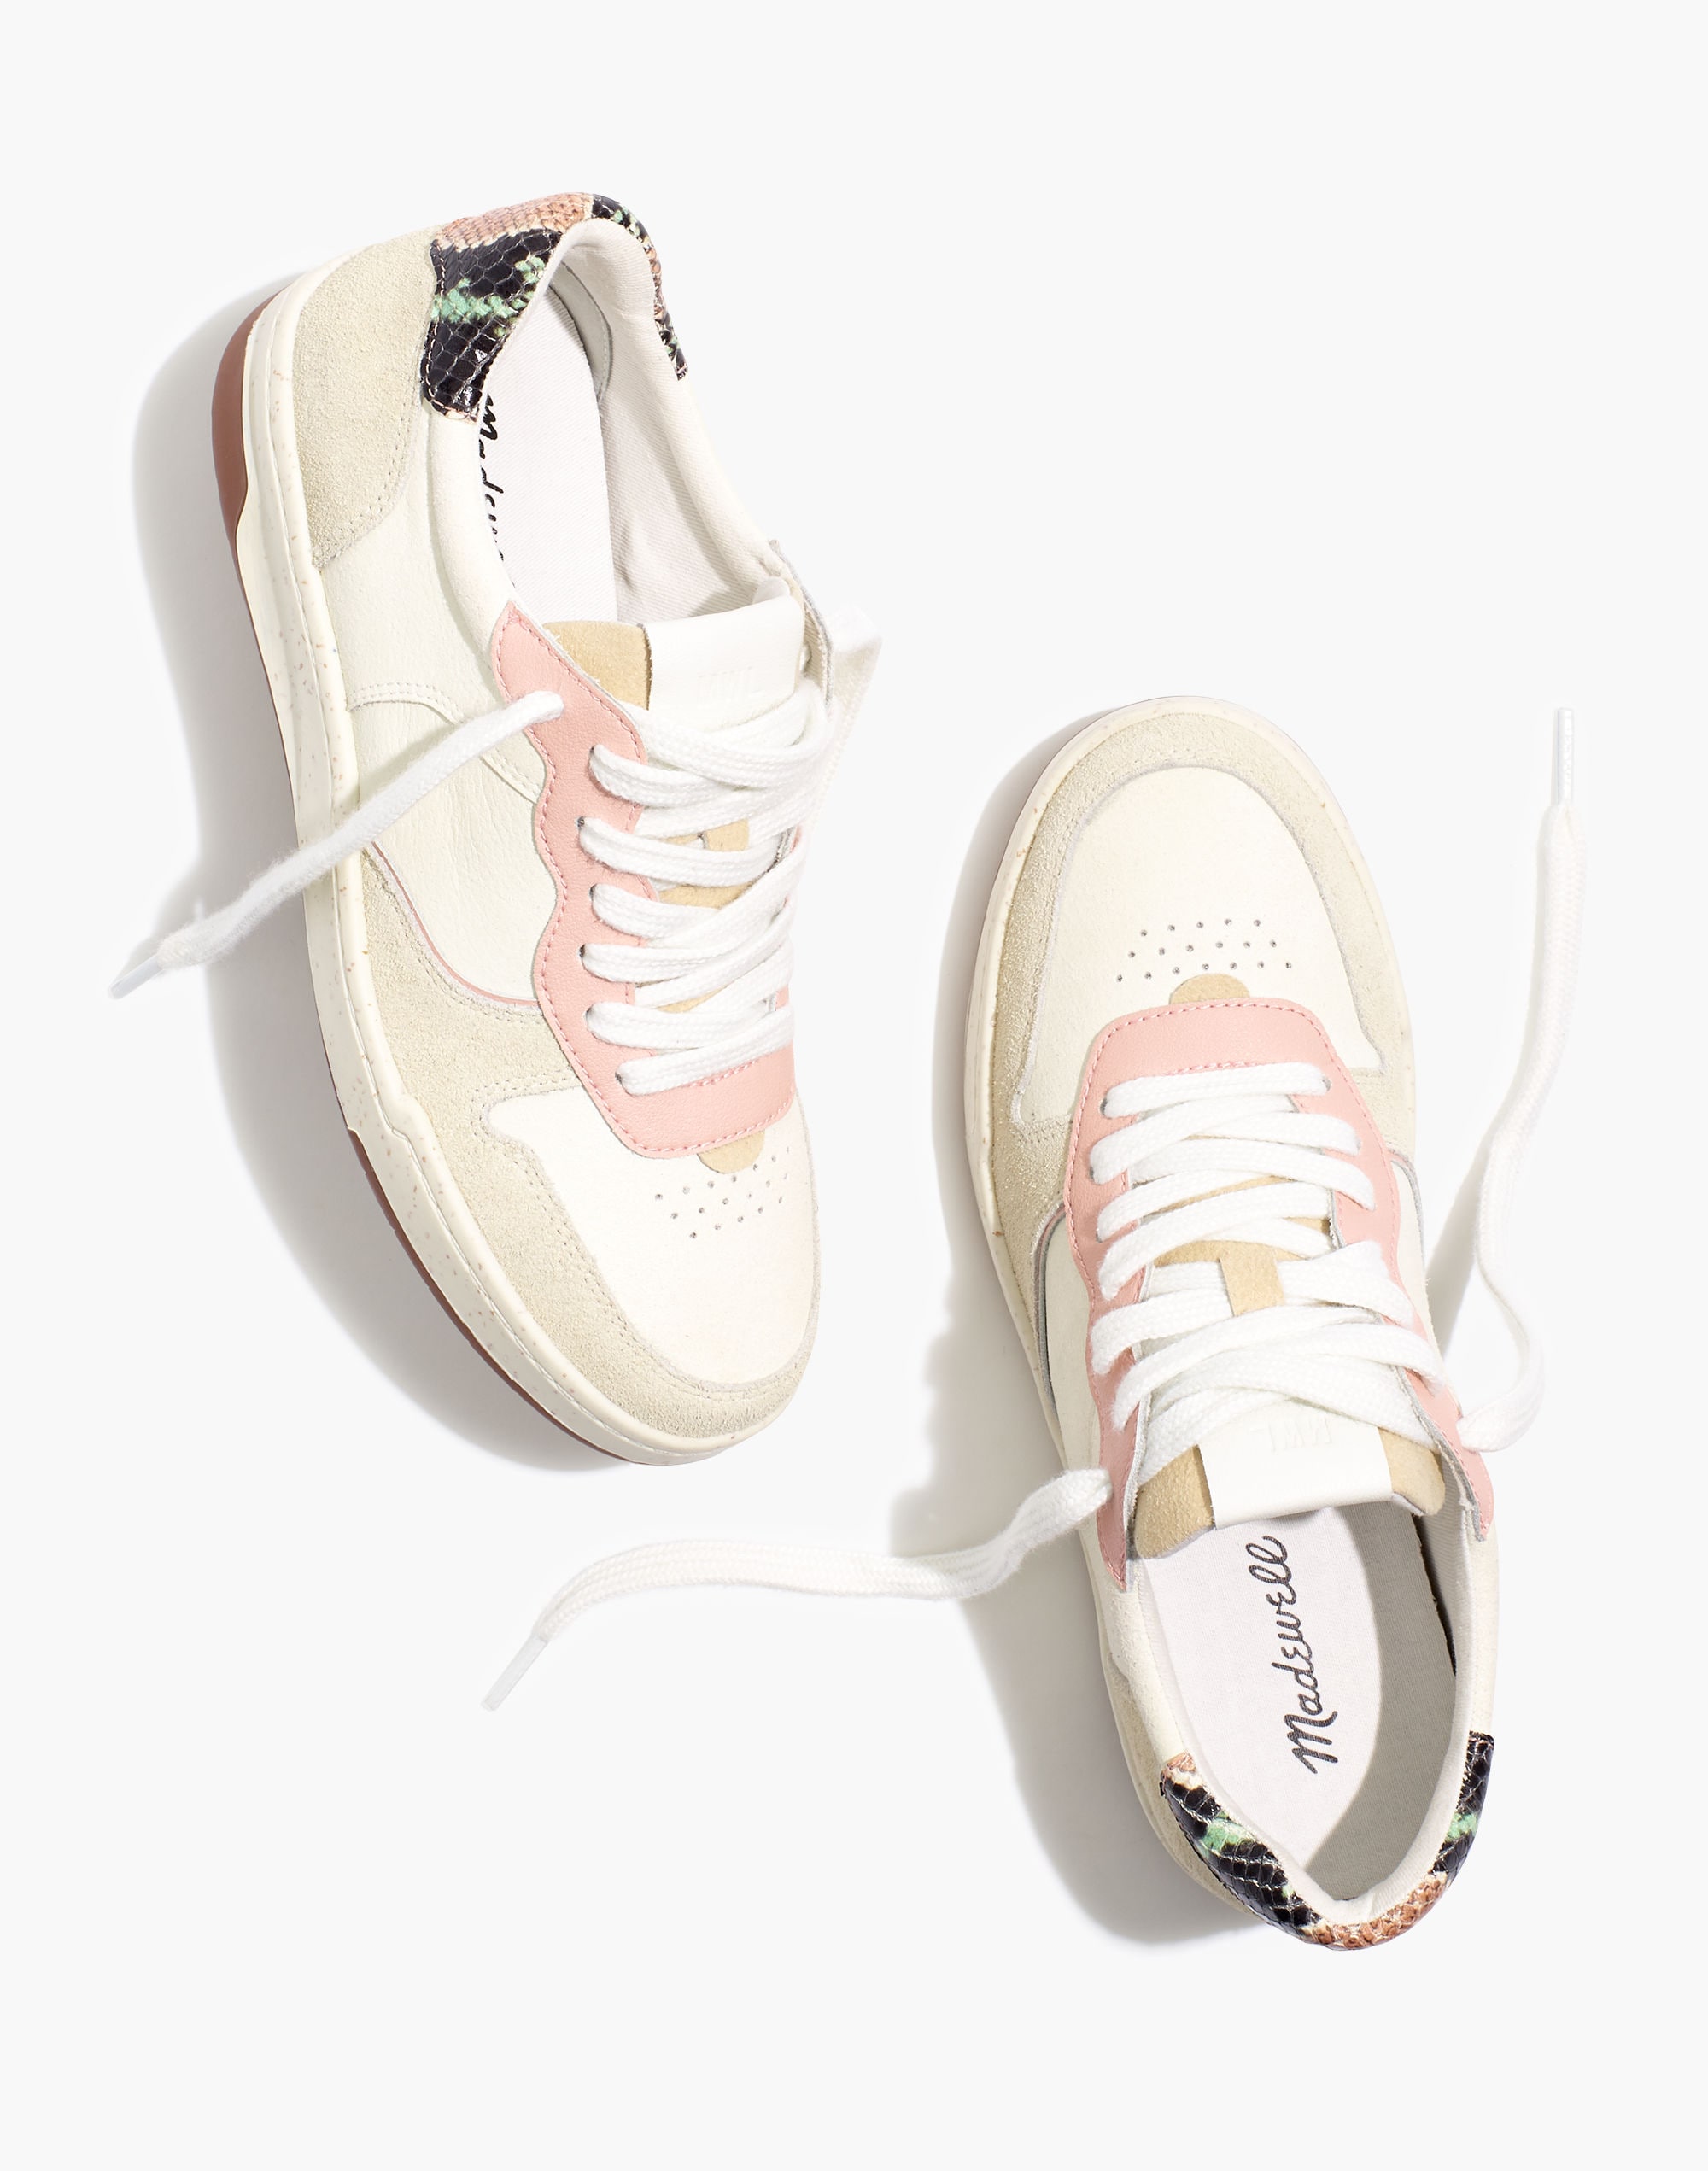 Court Sneakers in Colorblock Suede and Snakeskin Embossed Leather